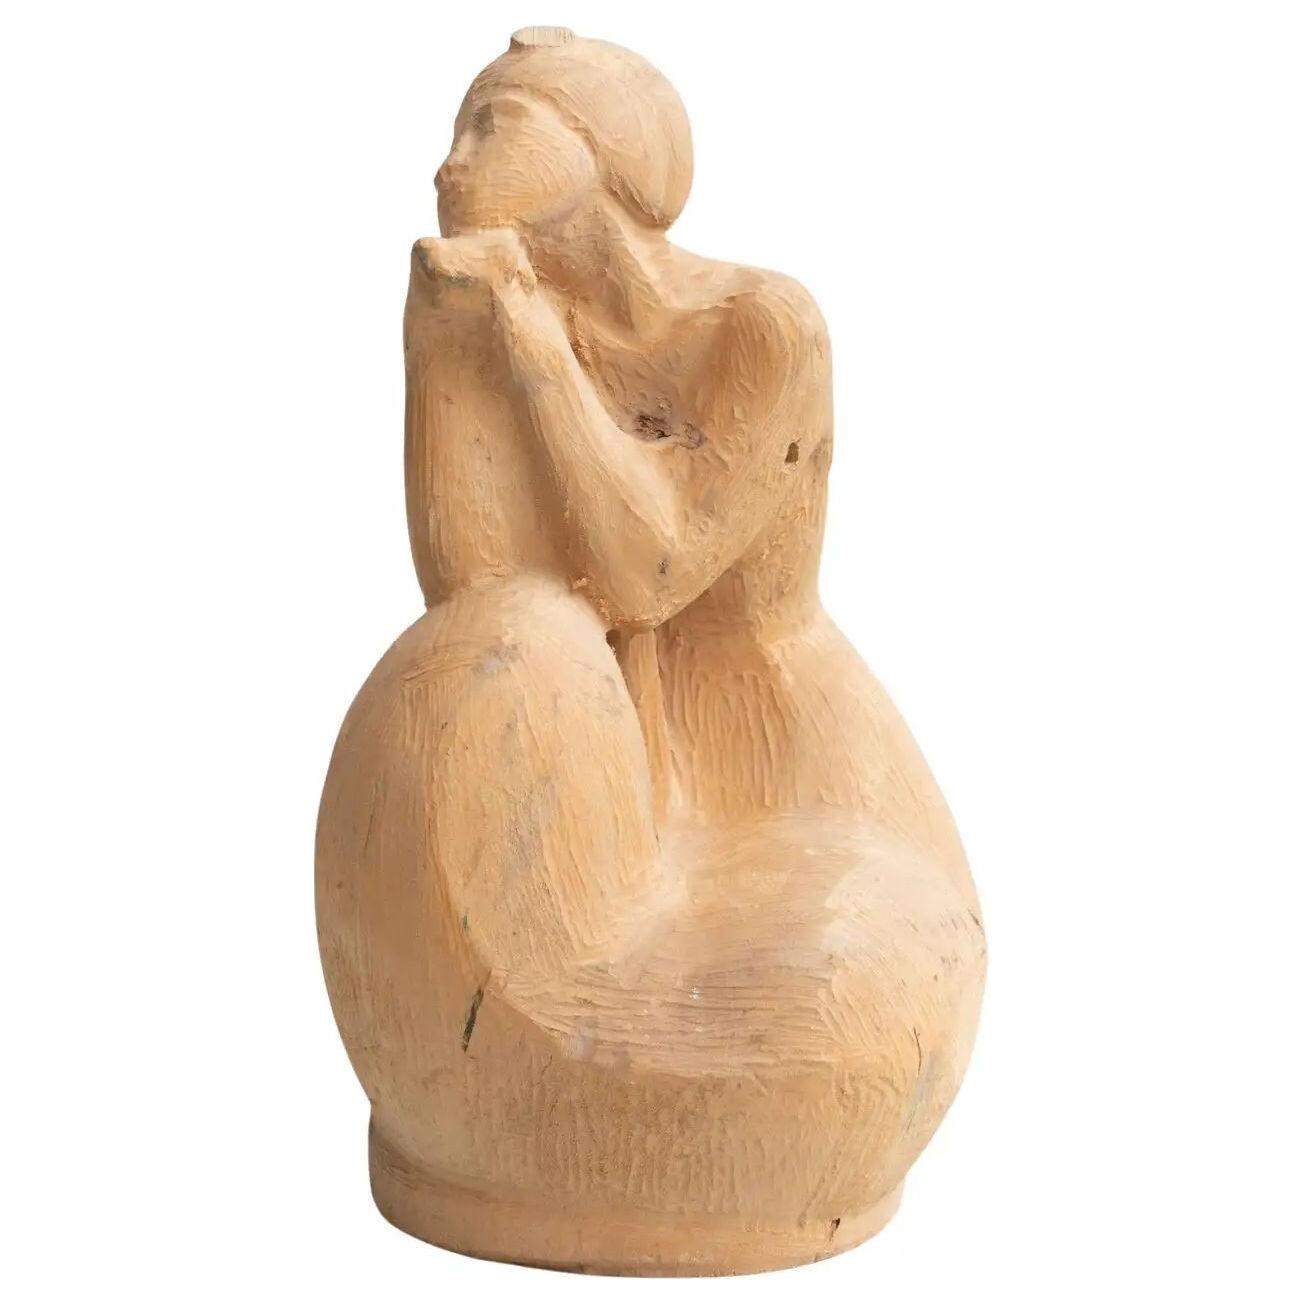 Traditional Preliminary Sketch Wooden Sculpture of a Woman